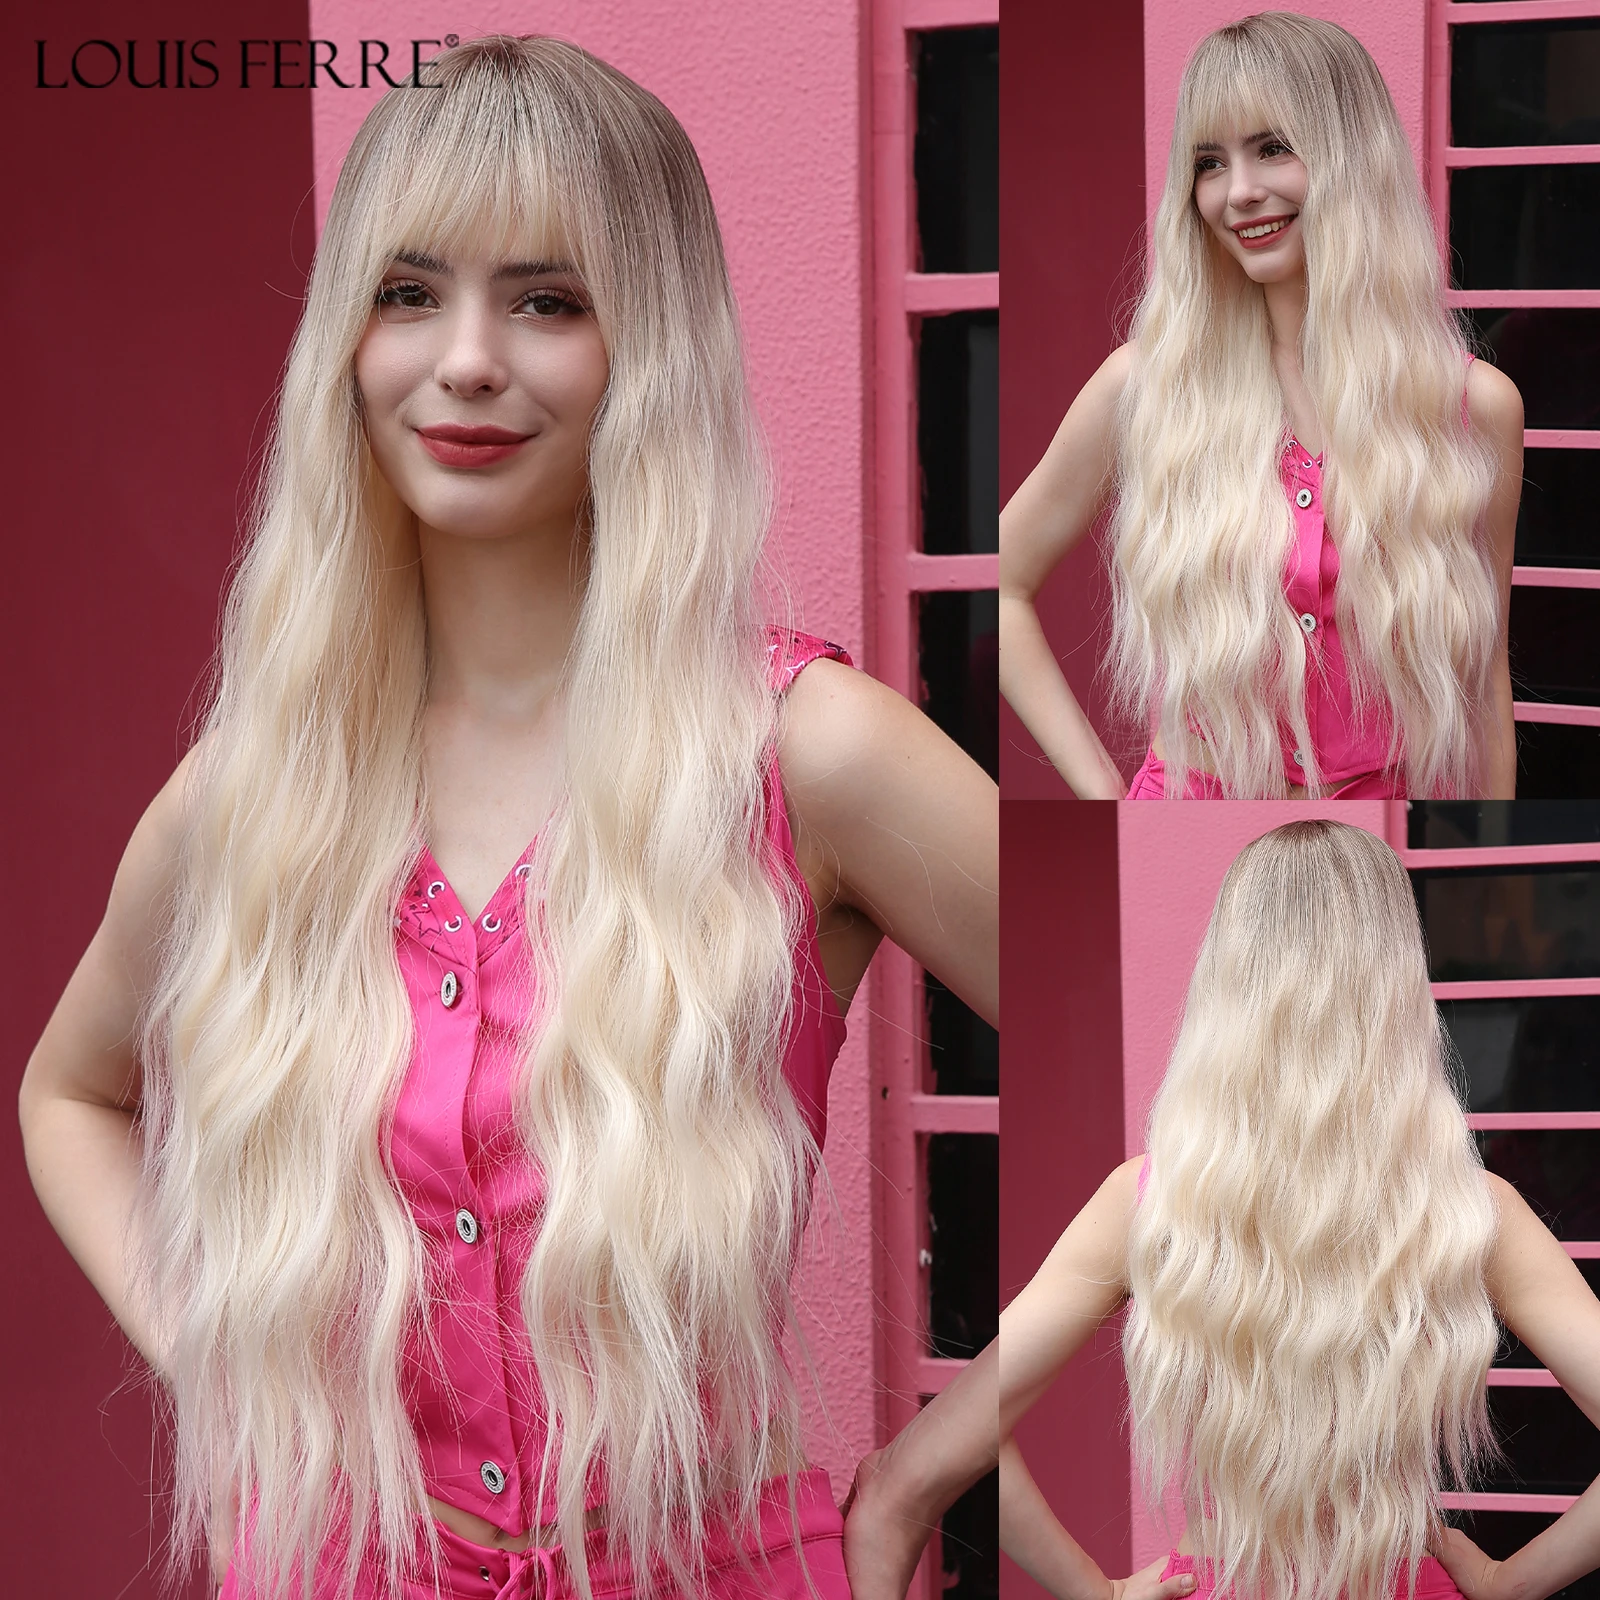 

LOUIS FERRE Light Blonde Ombre Synthetic Wigs With Bangs Long Wavy Natural Hair Wig for Women Daily Cosplay Heat Resistant Hair